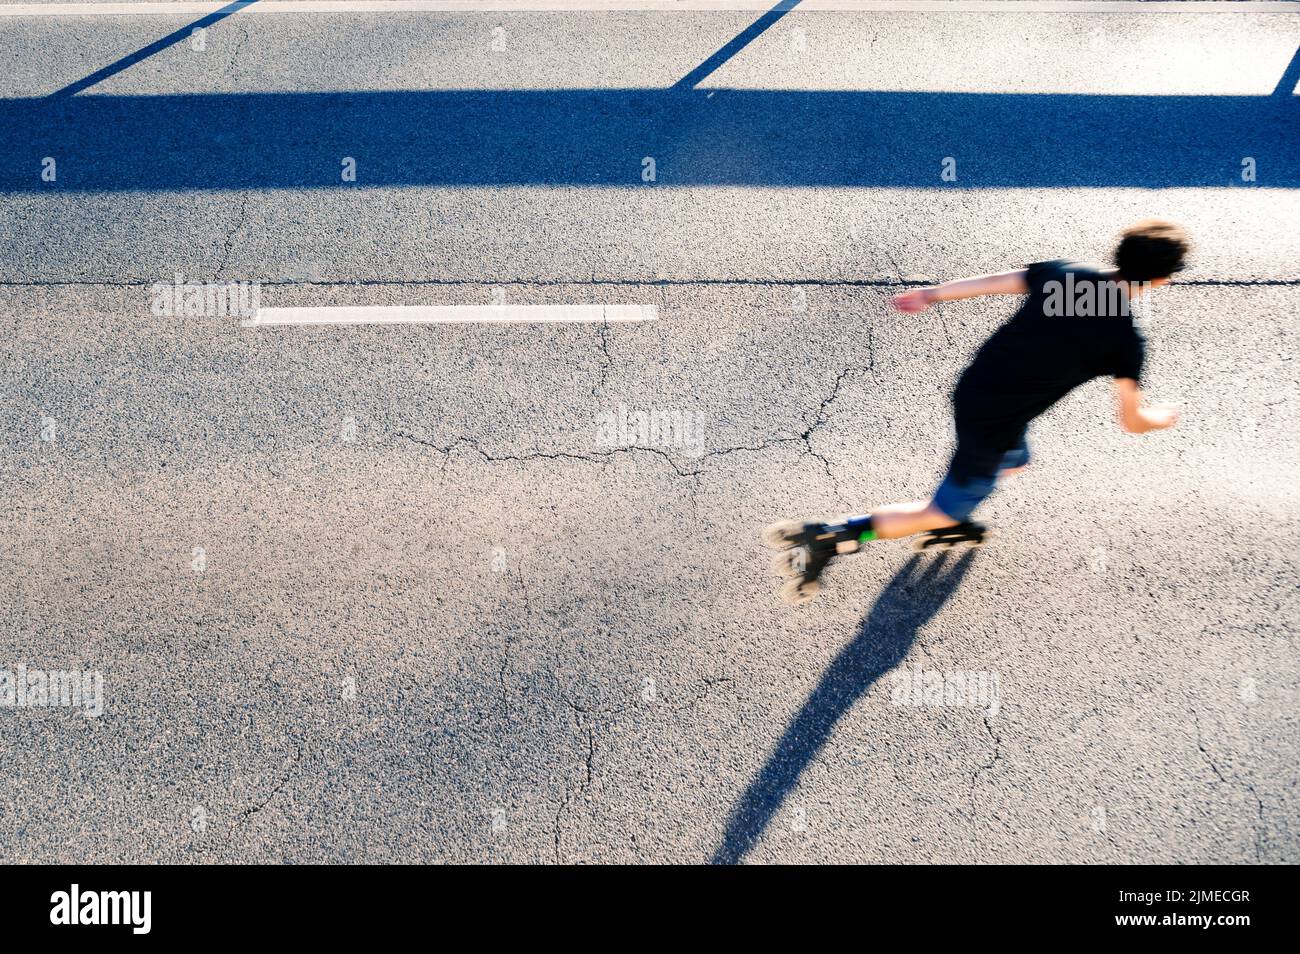 Person riding roller skates outdoors, top view Stock Photo